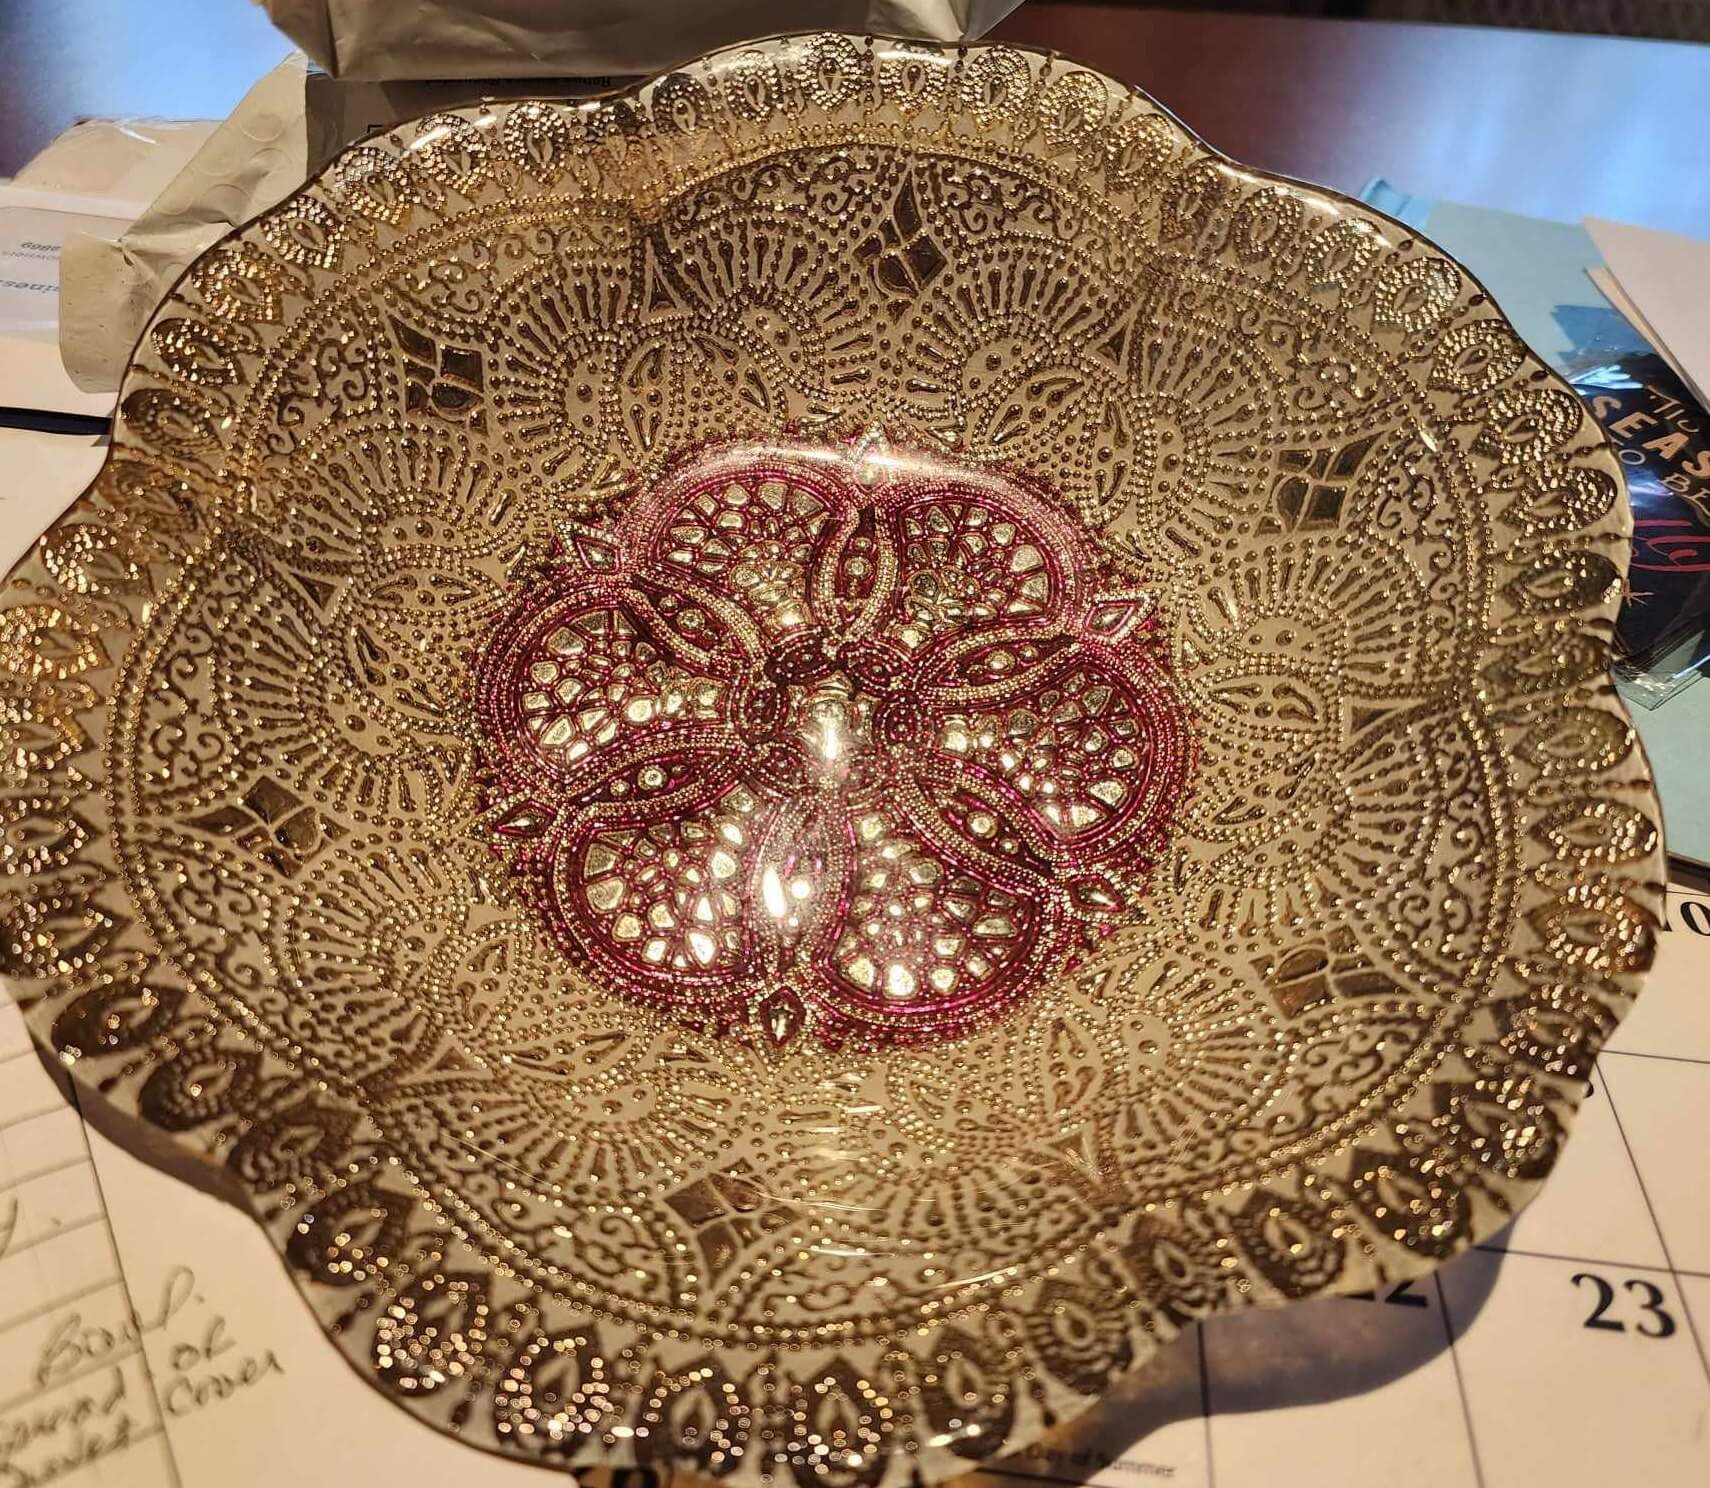 8 diameter Moroccan inspired by the master weavers a luminescent bowl is hand made of glass Hand decorated using gold leaf and layered with organic pigment